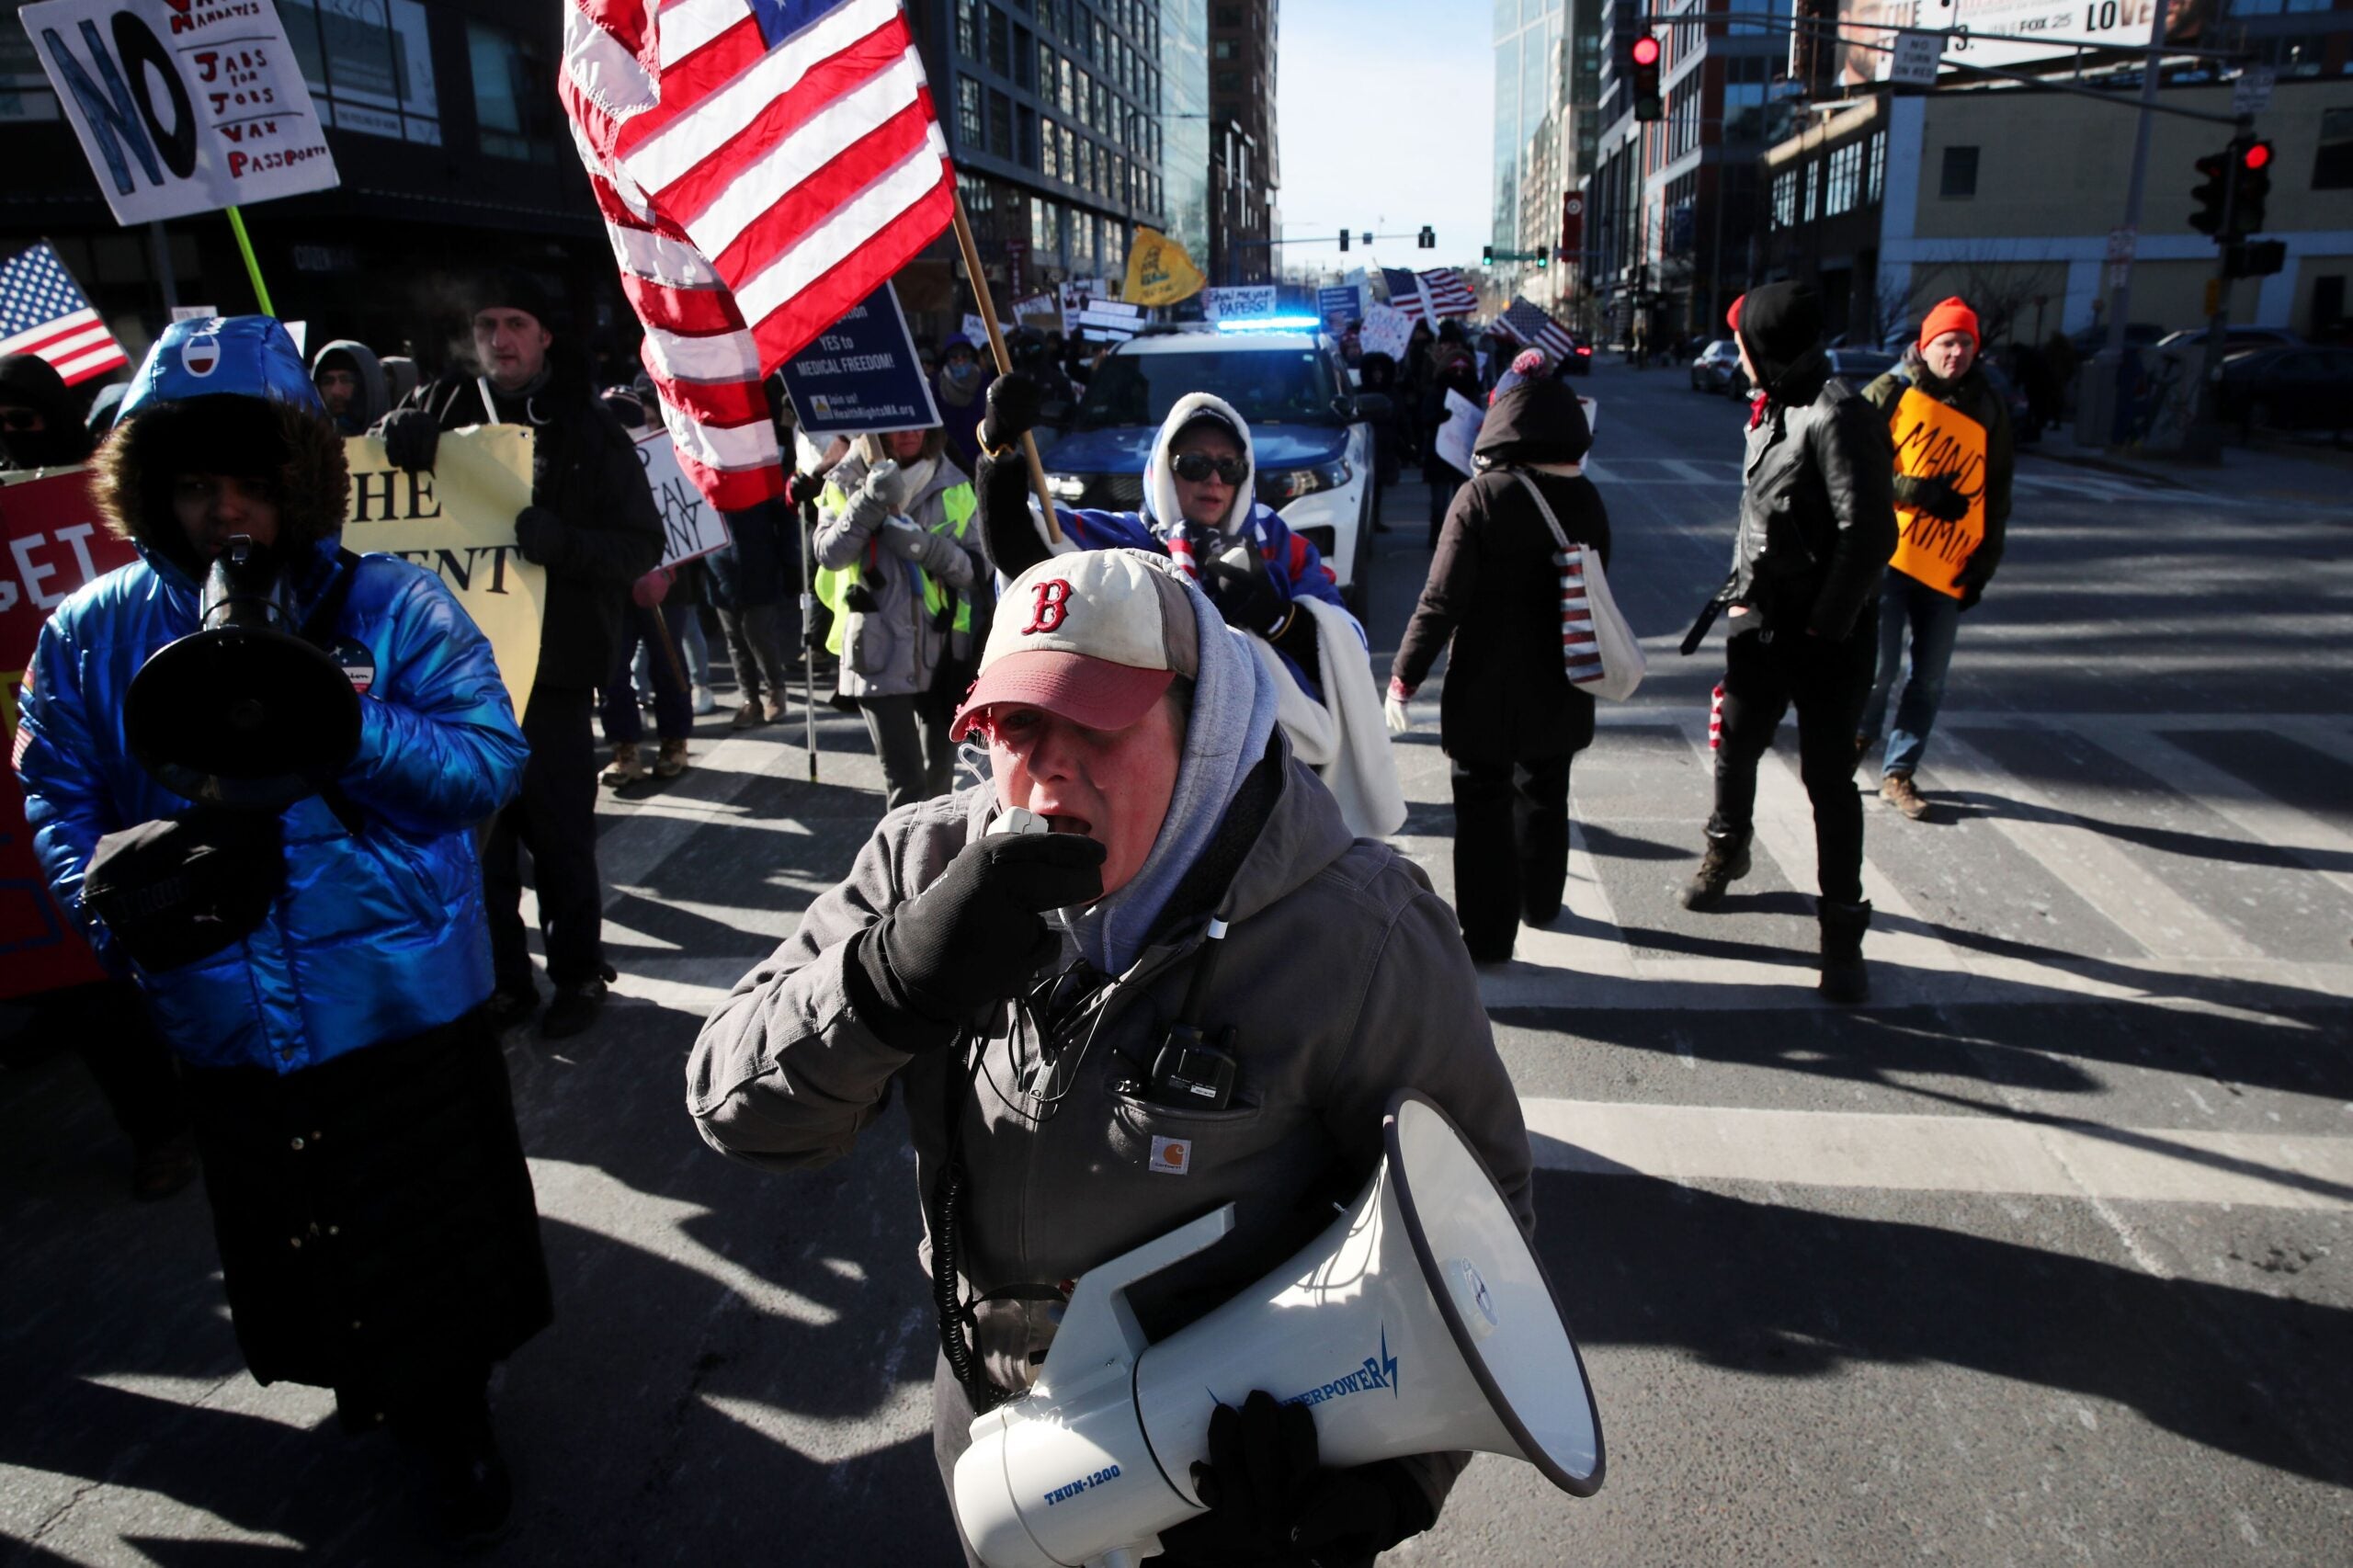 Former Boston police Sergeant Shana Cottone is shown holding a megaphone and protesting in the street, wearing winter clothing, with an American flag behind her.